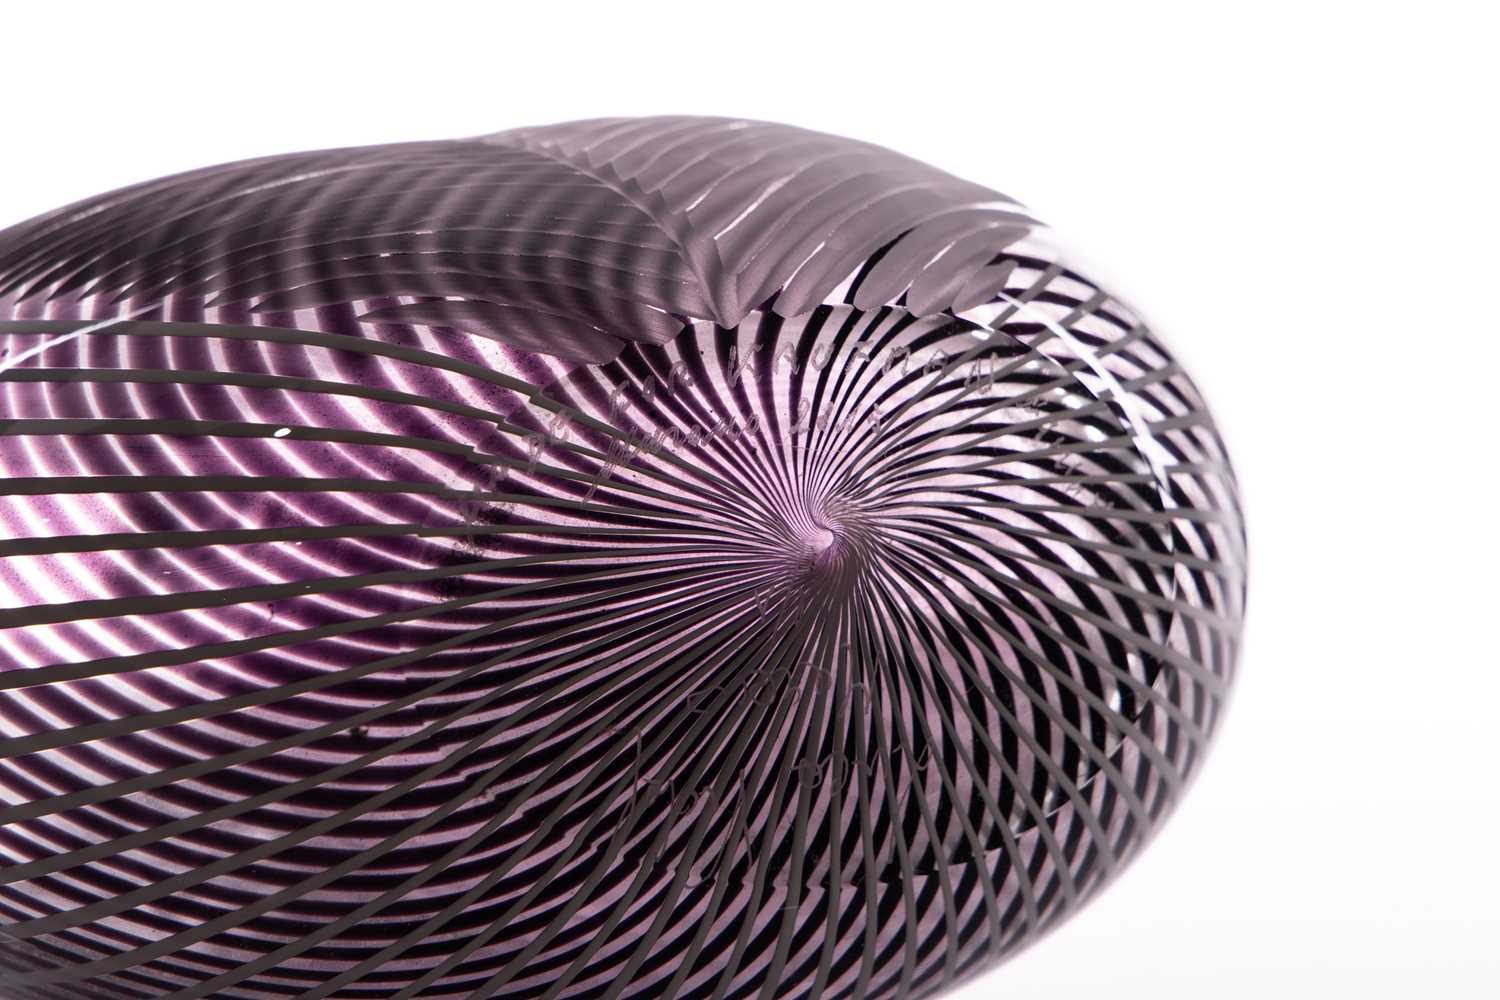 A Luca Vidal Murano large art glass vase with textured finish to one side, bespoke made for the - Image 7 of 9